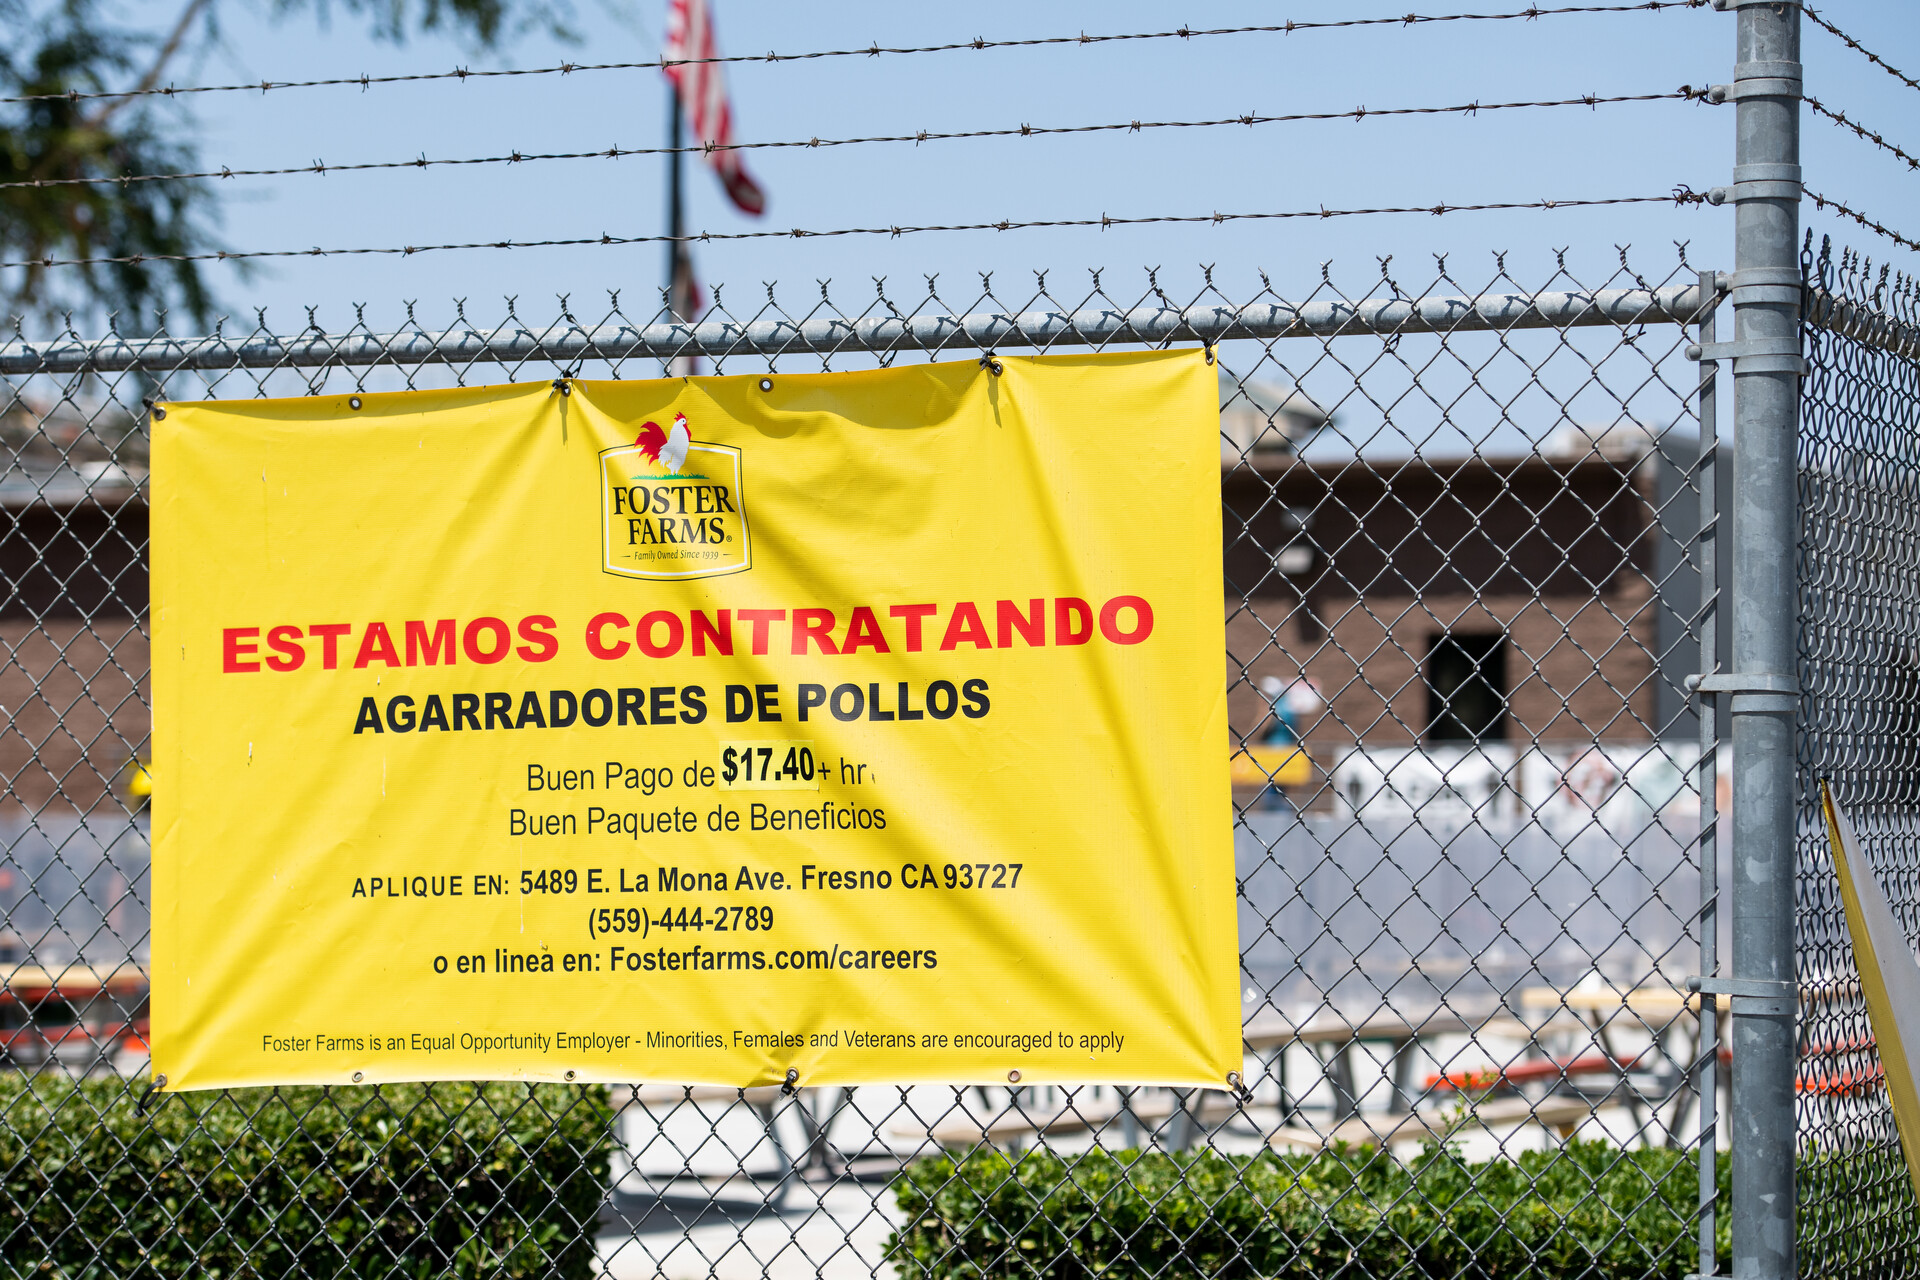 A yellow plaster sign with red and black writing hangs on a chain link fence beneath barbed wire. It has a Foster Farms logo, and the top line reads, "Estamos Contratando."